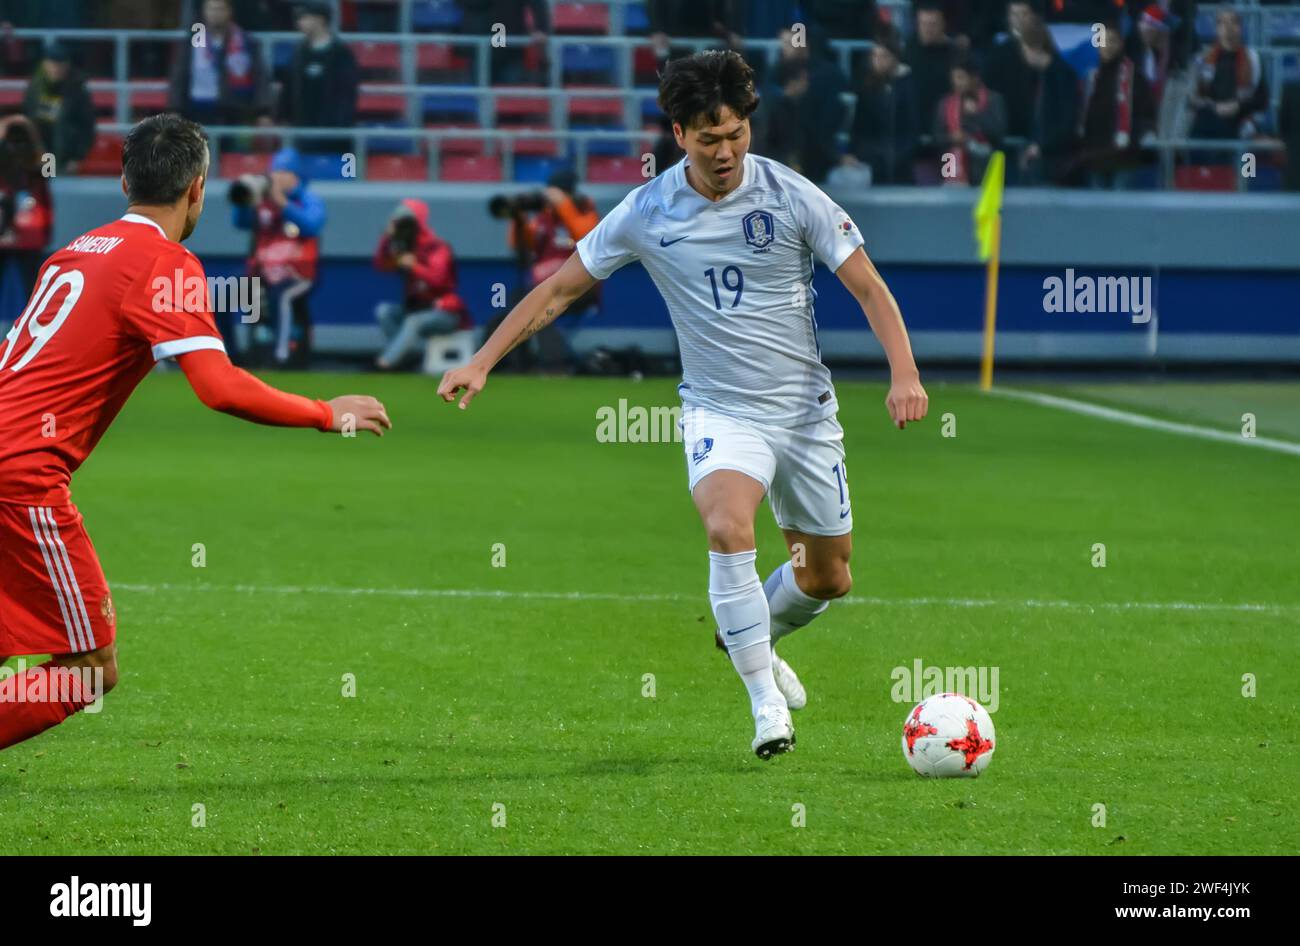 Moscow, Russia – October 7, 2017. South Korea centre-back Kim Young-Gwon in action during international friendly match Russia vs South Korea (4-2). Stock Photo